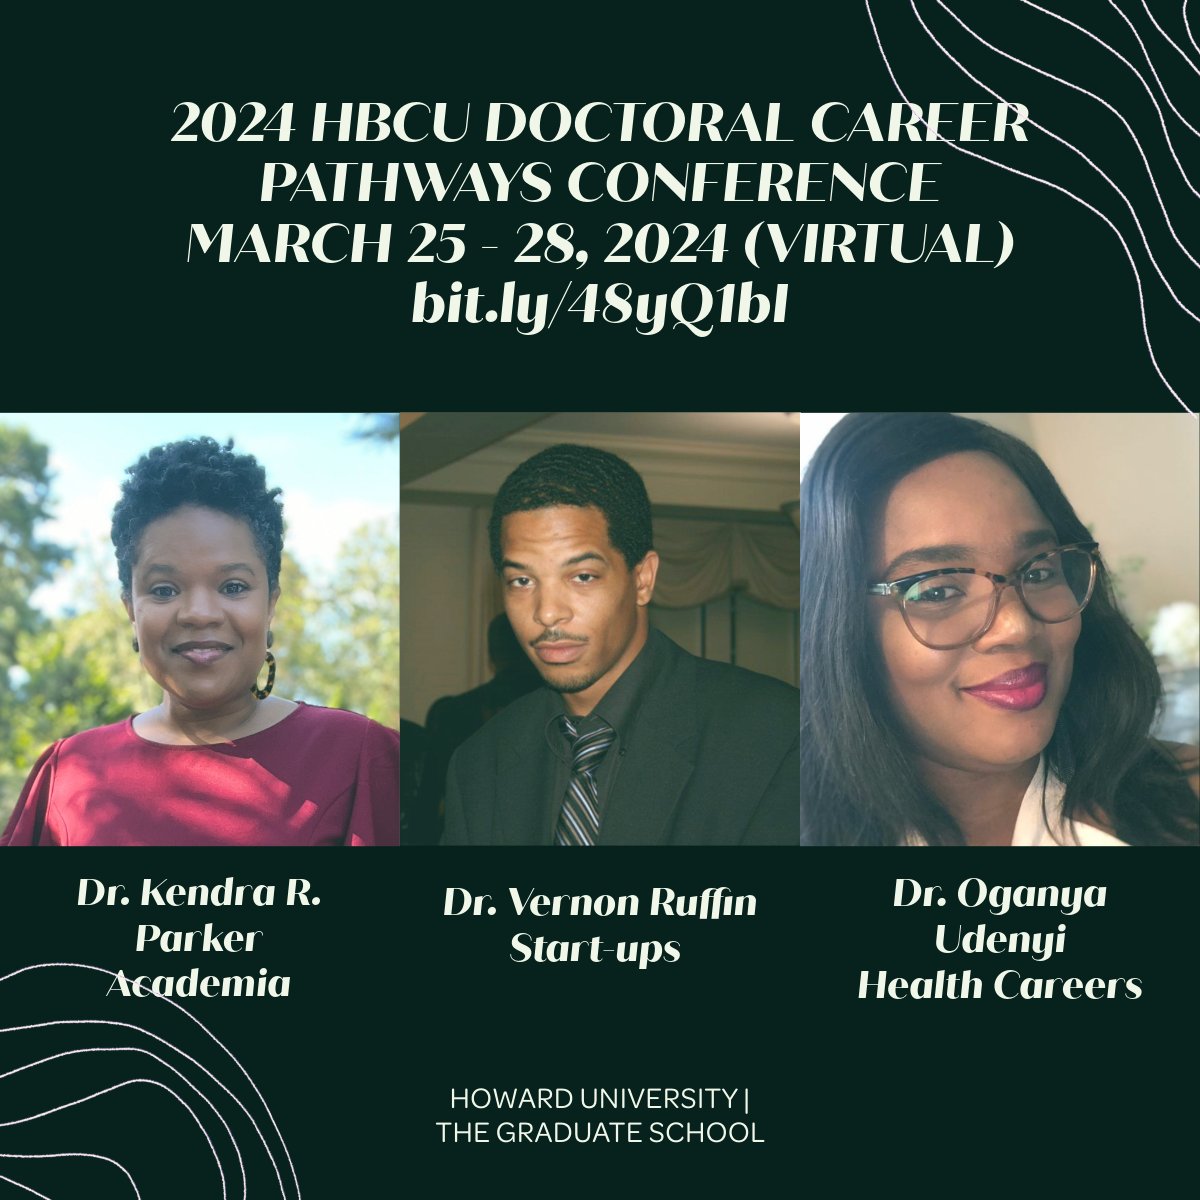 Save the date: 2024 #HBCU Doctoral Career Pathways Conference | The Graduate School
bit.ly/48yQ1bI.  Featuring Dr. Kendra R. Parker on the #academia panel, Dr. Vernon Ruffin on the #startups panel and Dr. Oganya Udenyi on health careers.@RuffinNeuroLab